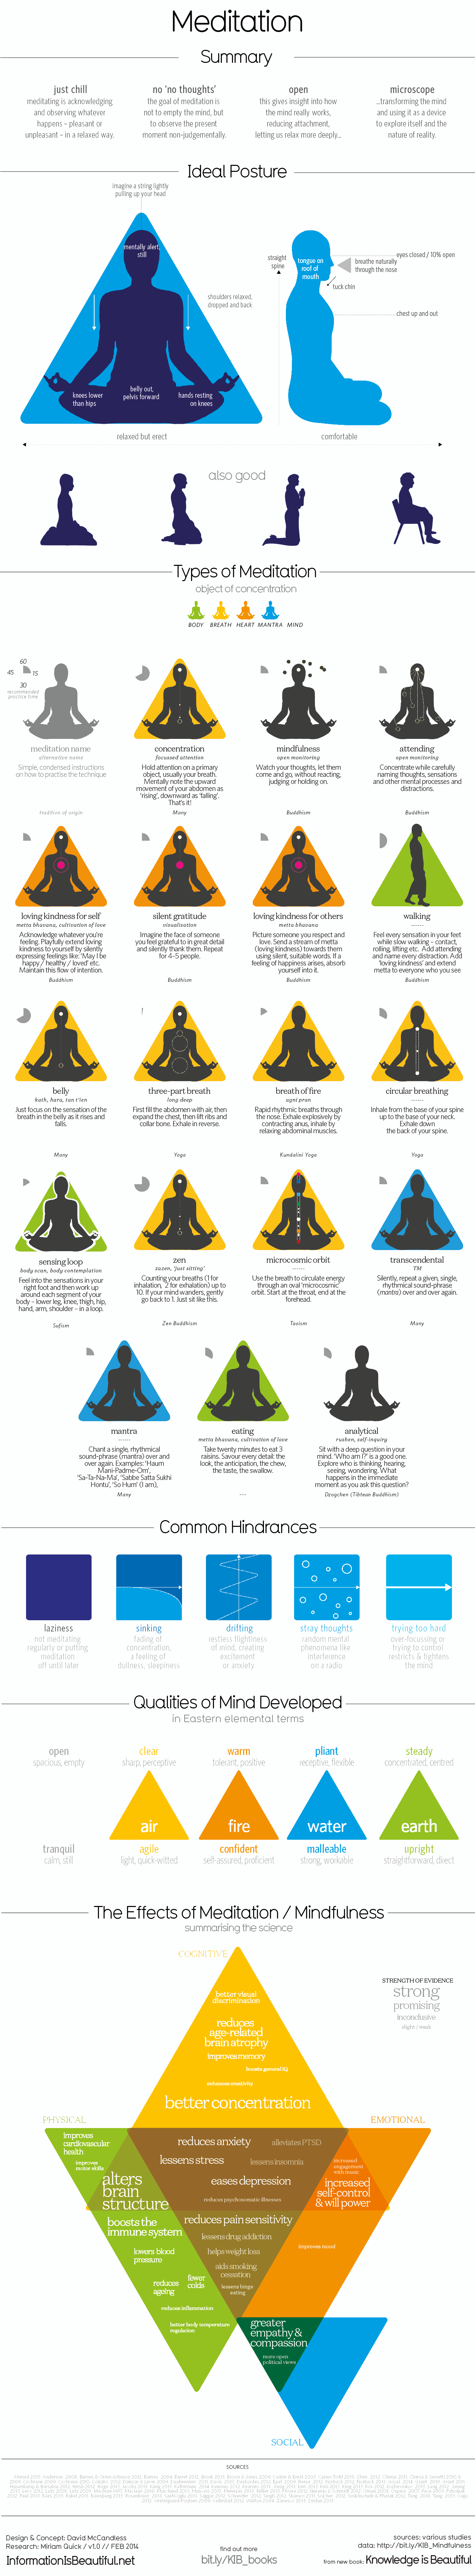 Different Types Of Meditation Infographic